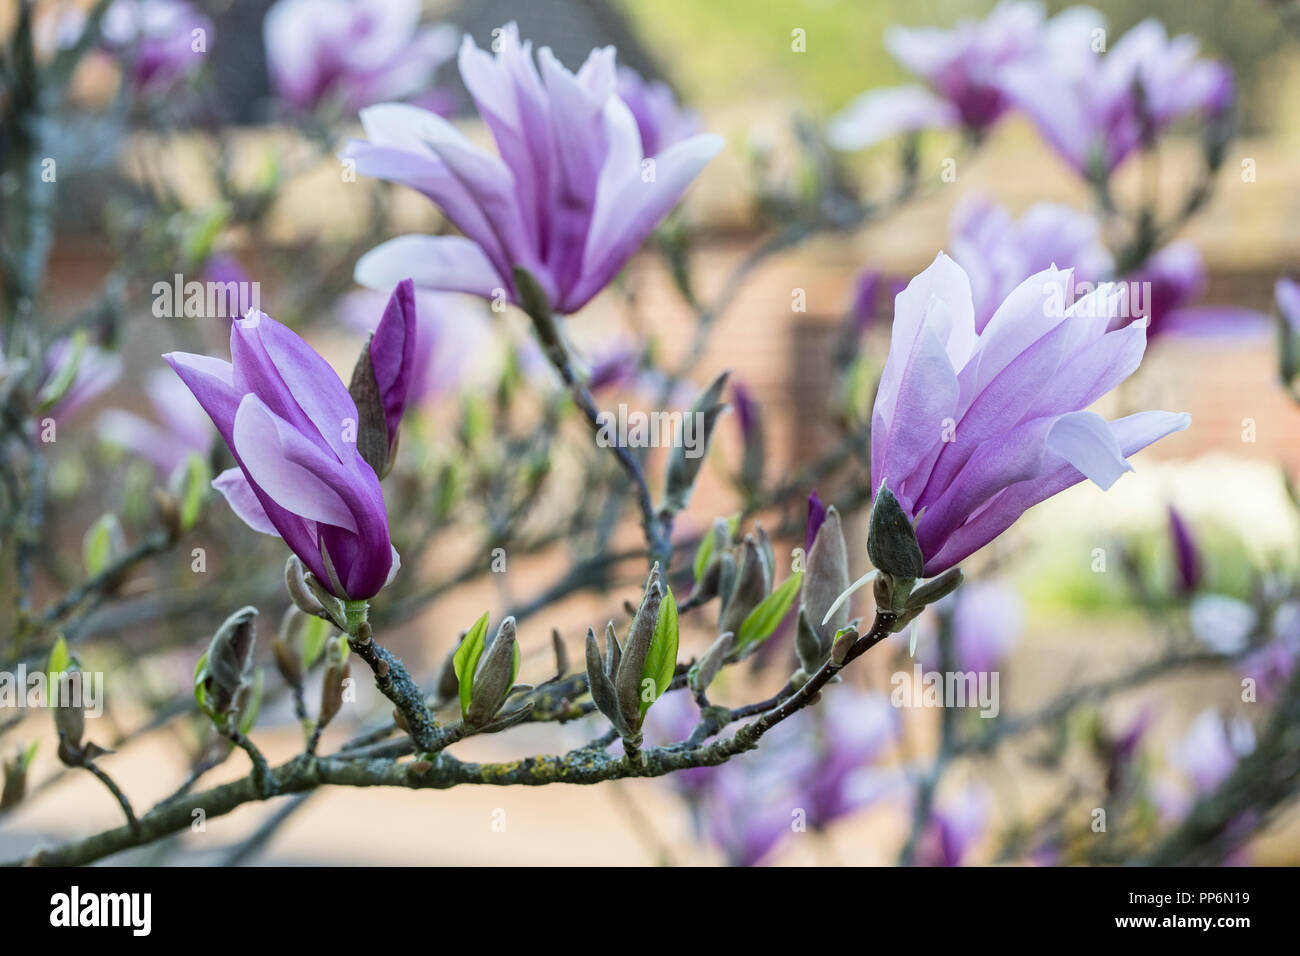 Close up of magnolia tree with white and purple blossoms. Stock Photo